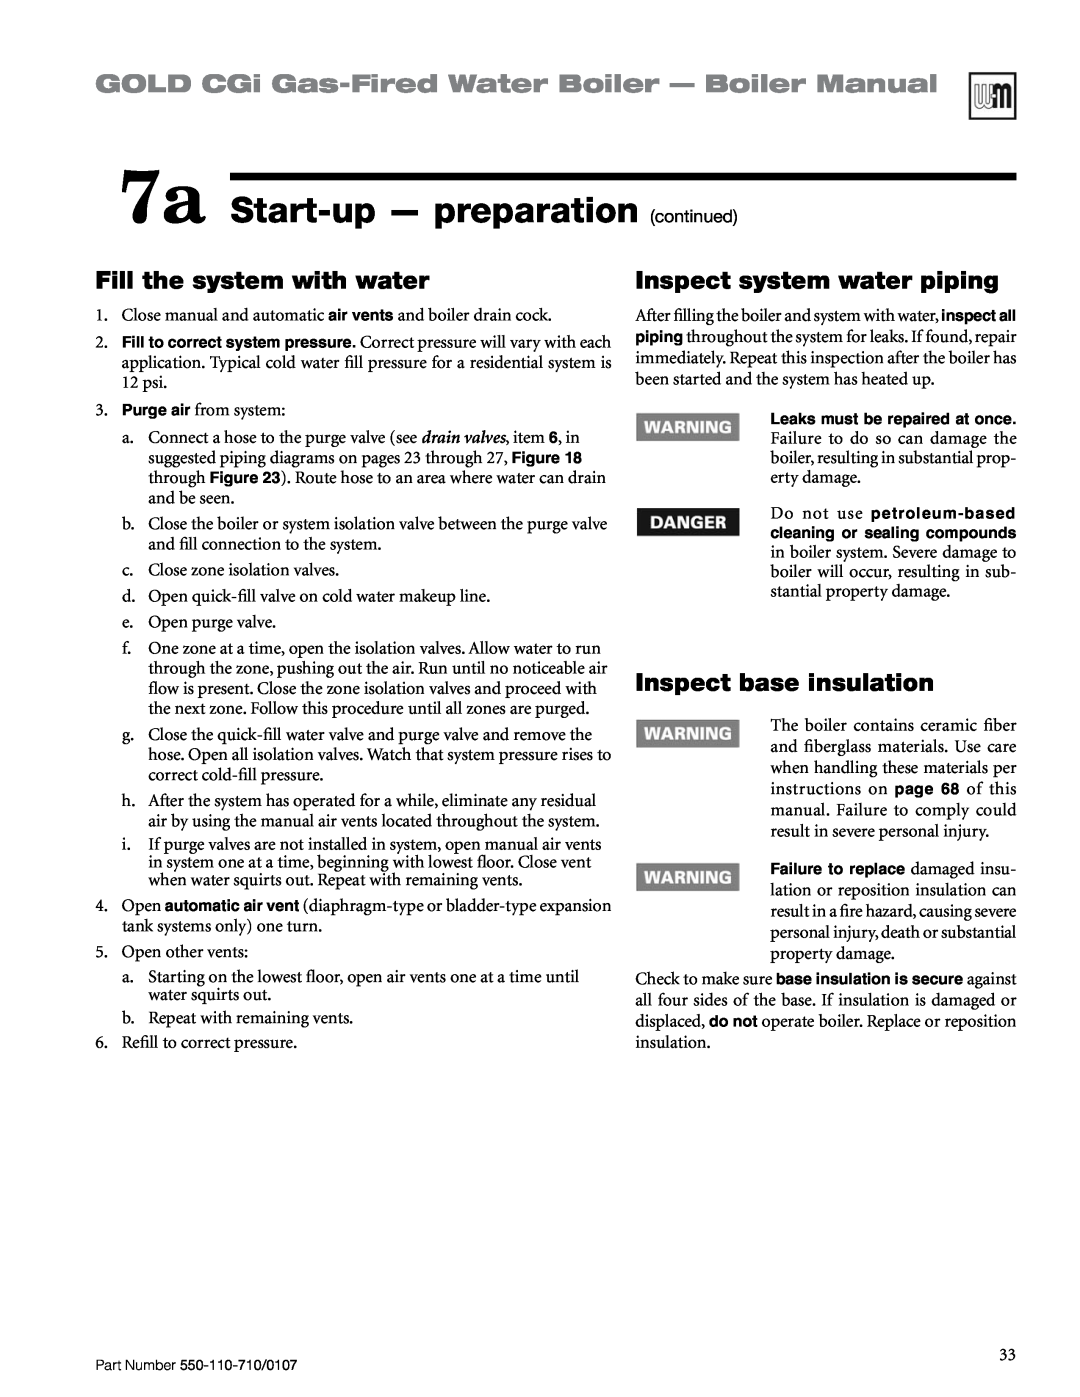 Weil-McLain Series 2 manual 7a Start-up— preparation continued, GOLD CGi Gas-FiredWater Boiler - Boiler Manual 